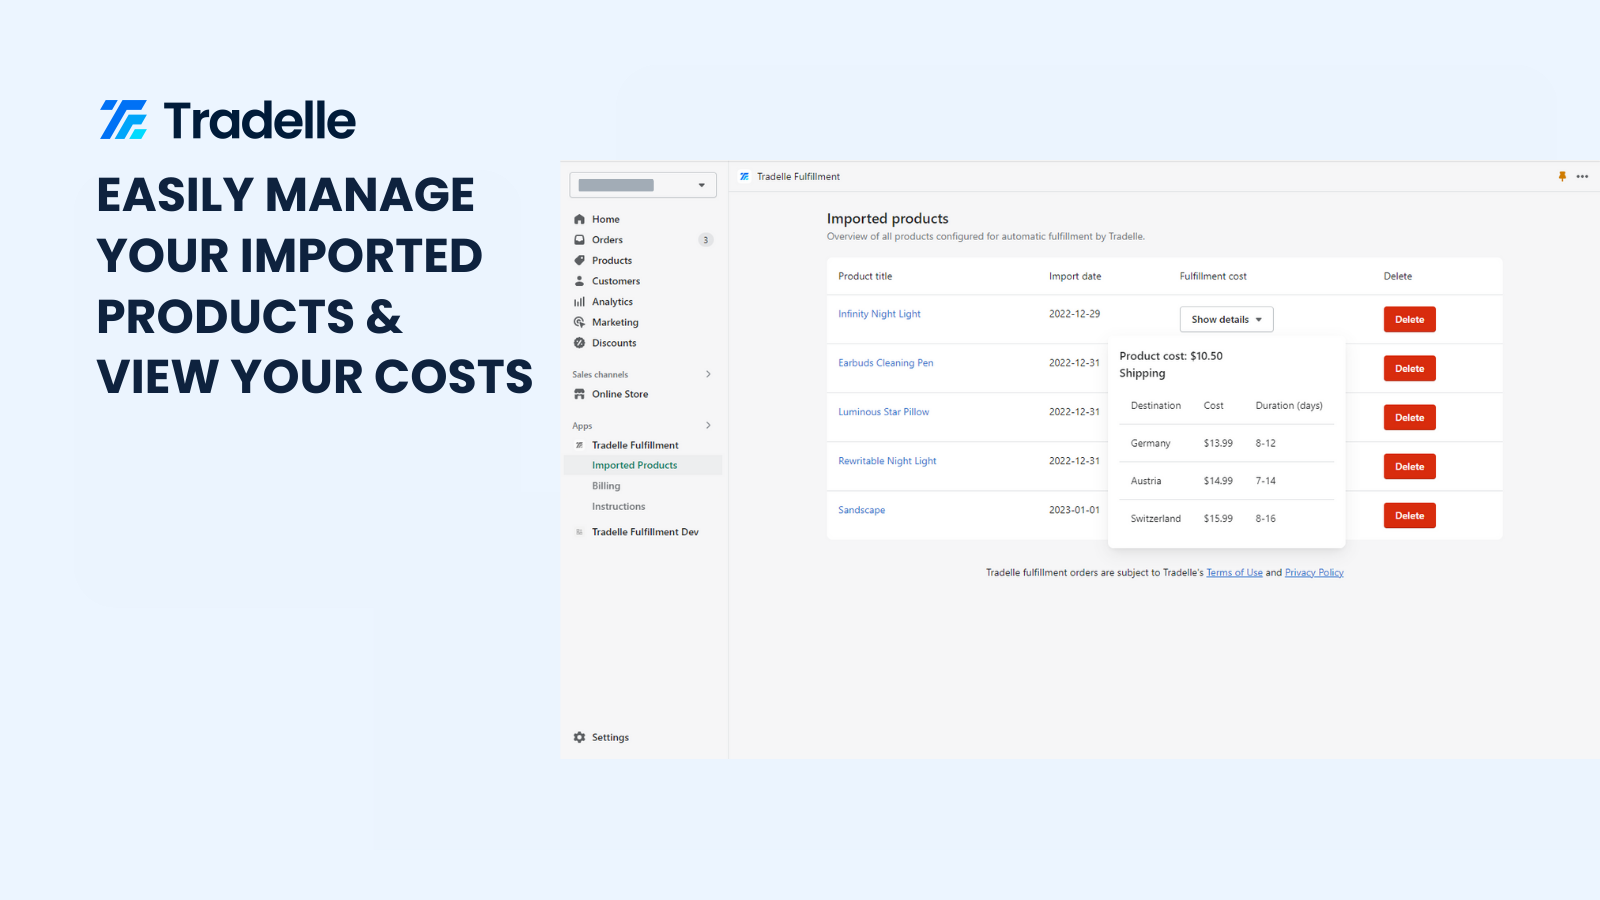 Easily manage your imported products and view your costs